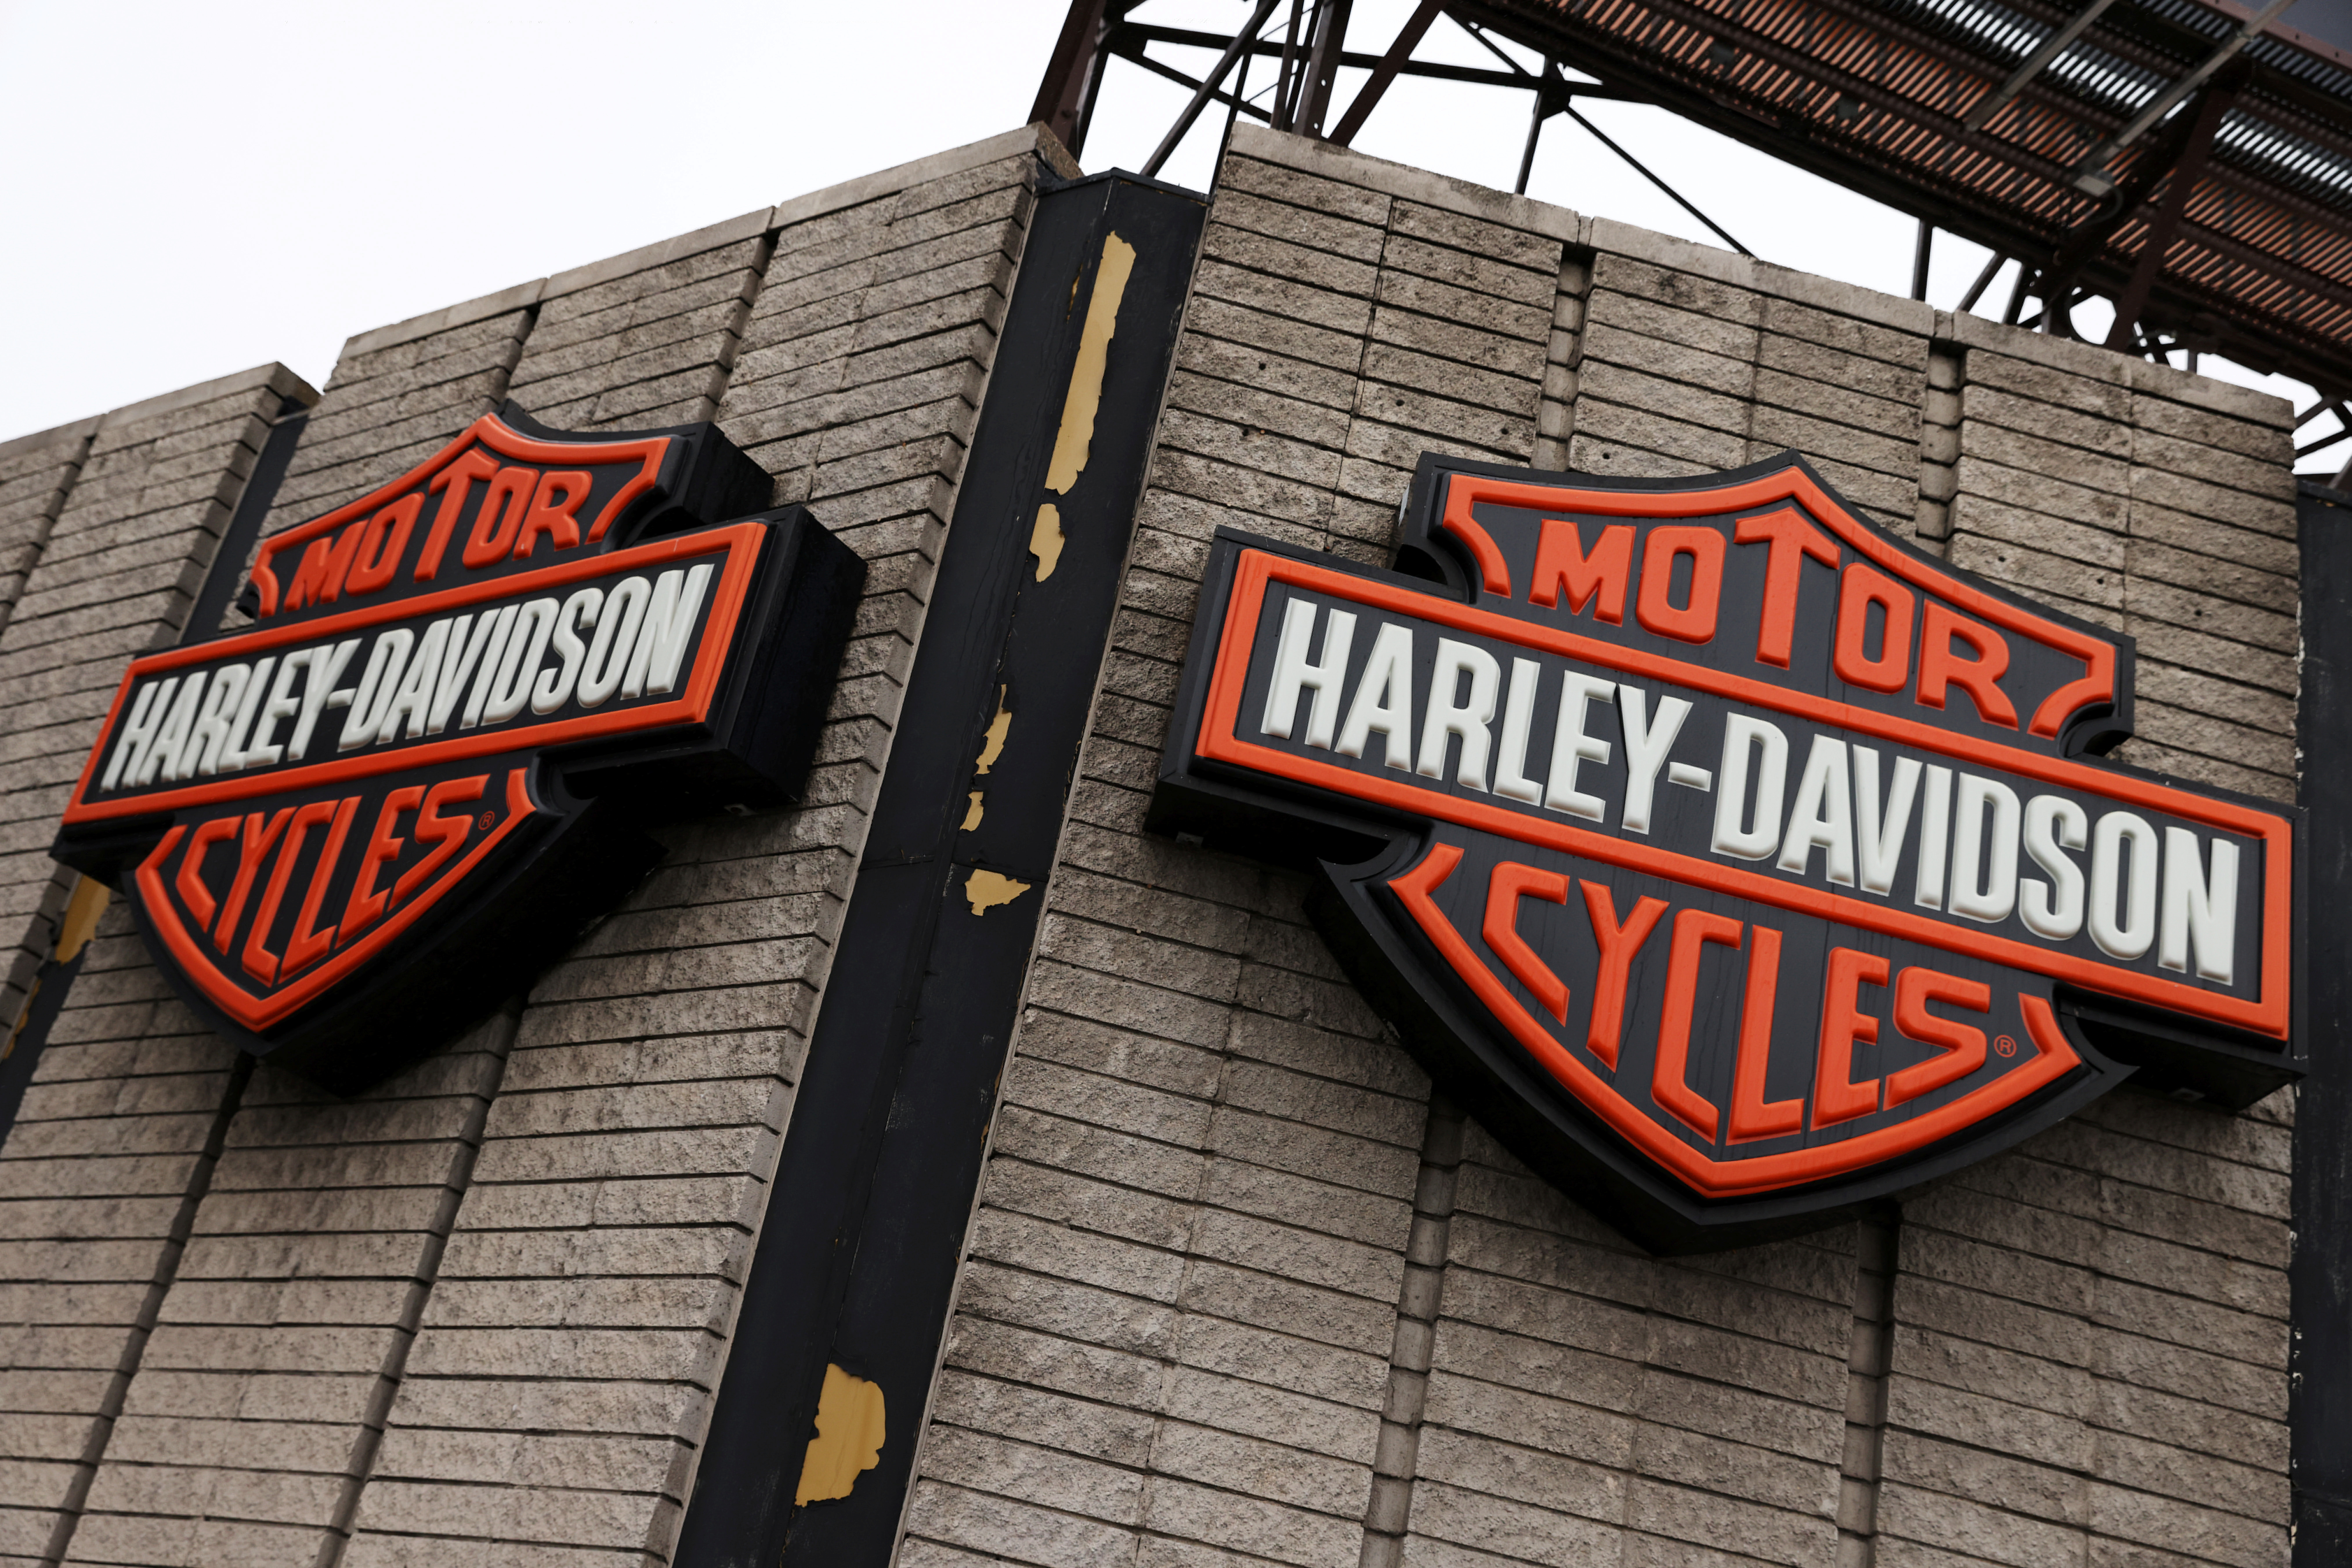 The logo of Harley-Davidson motorcycles is seen at a dealership in Queens, New York City